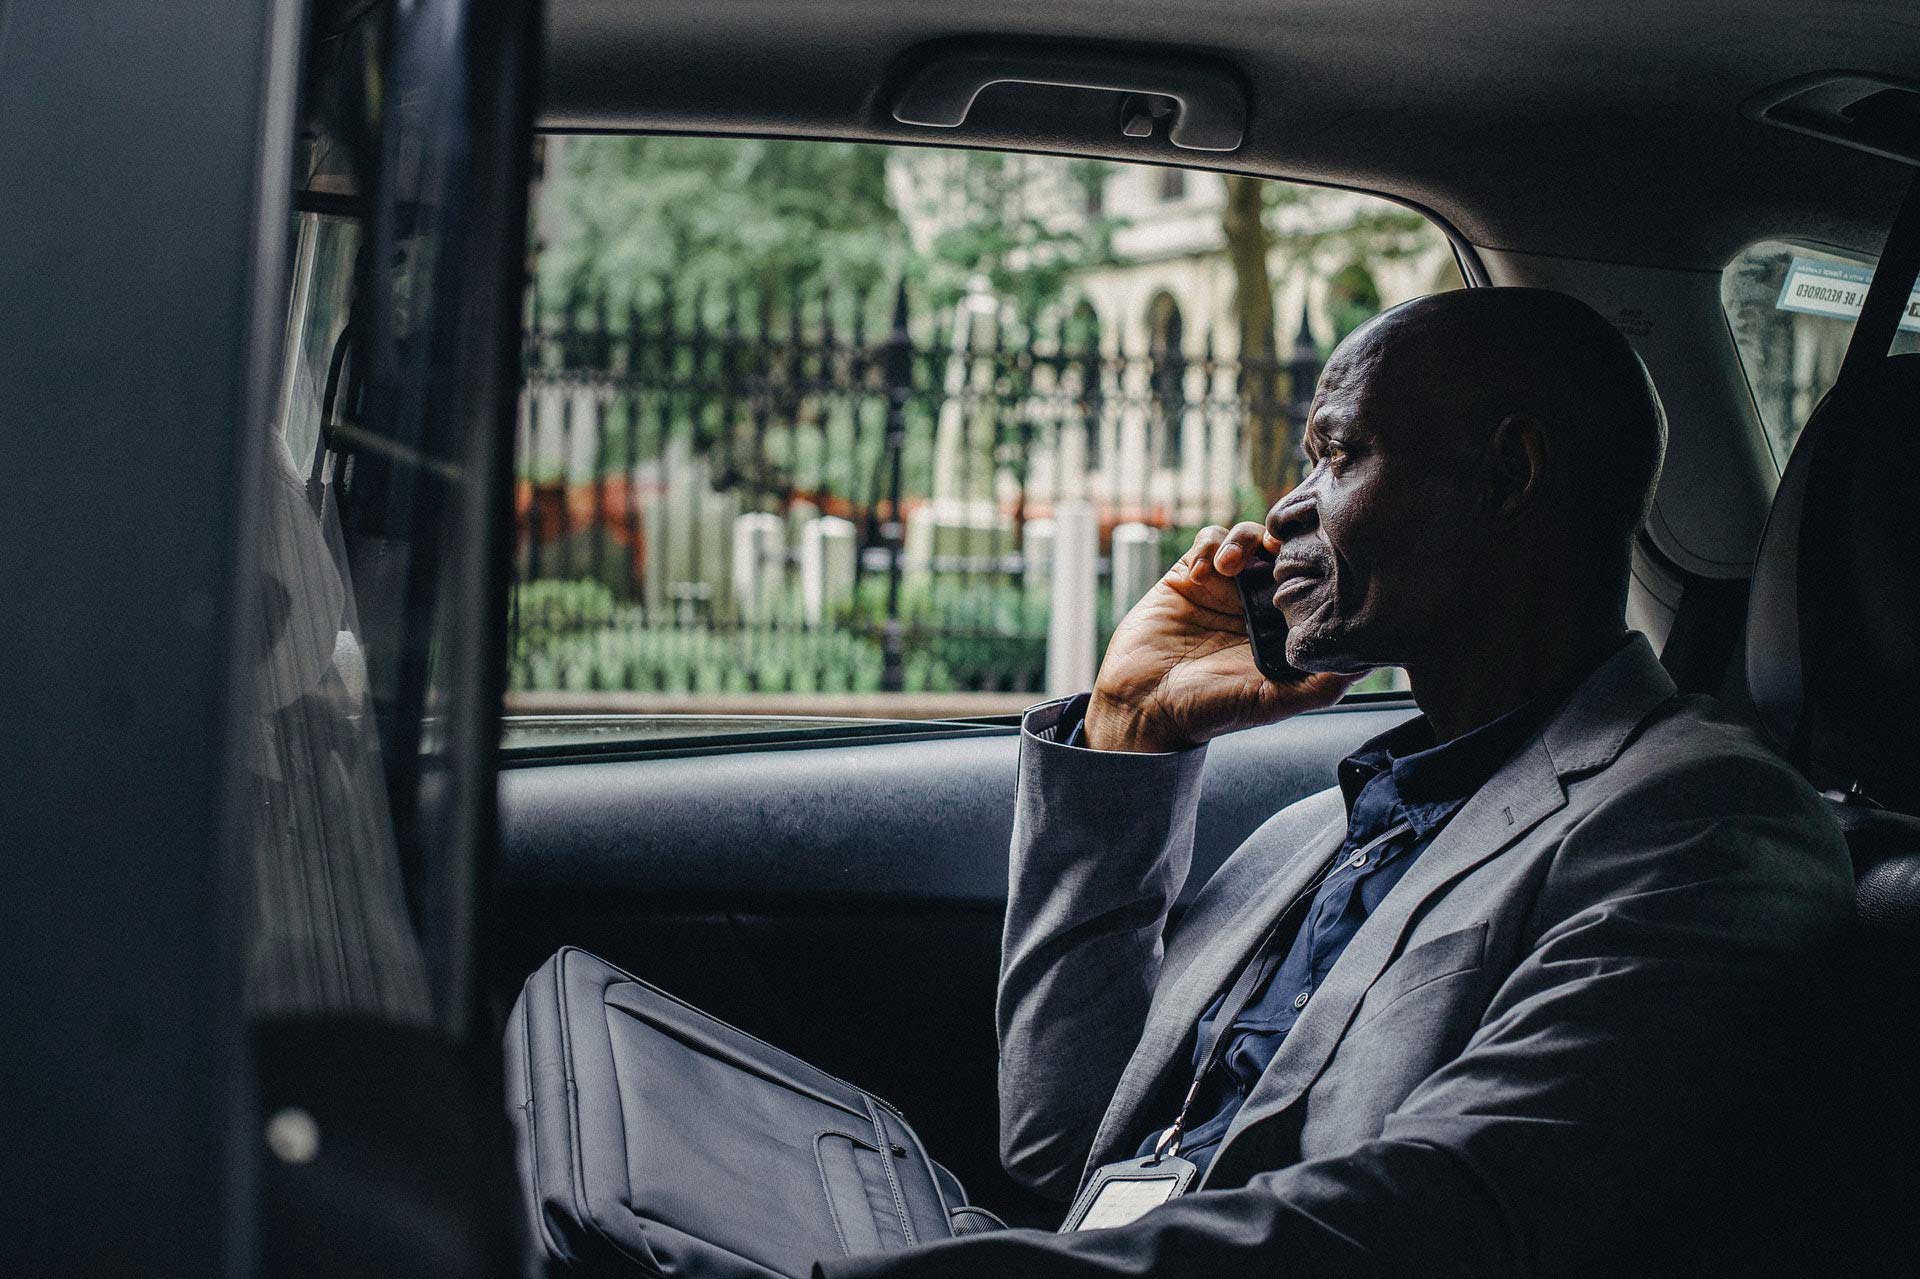 A man on his phone in the back seat of a taxi